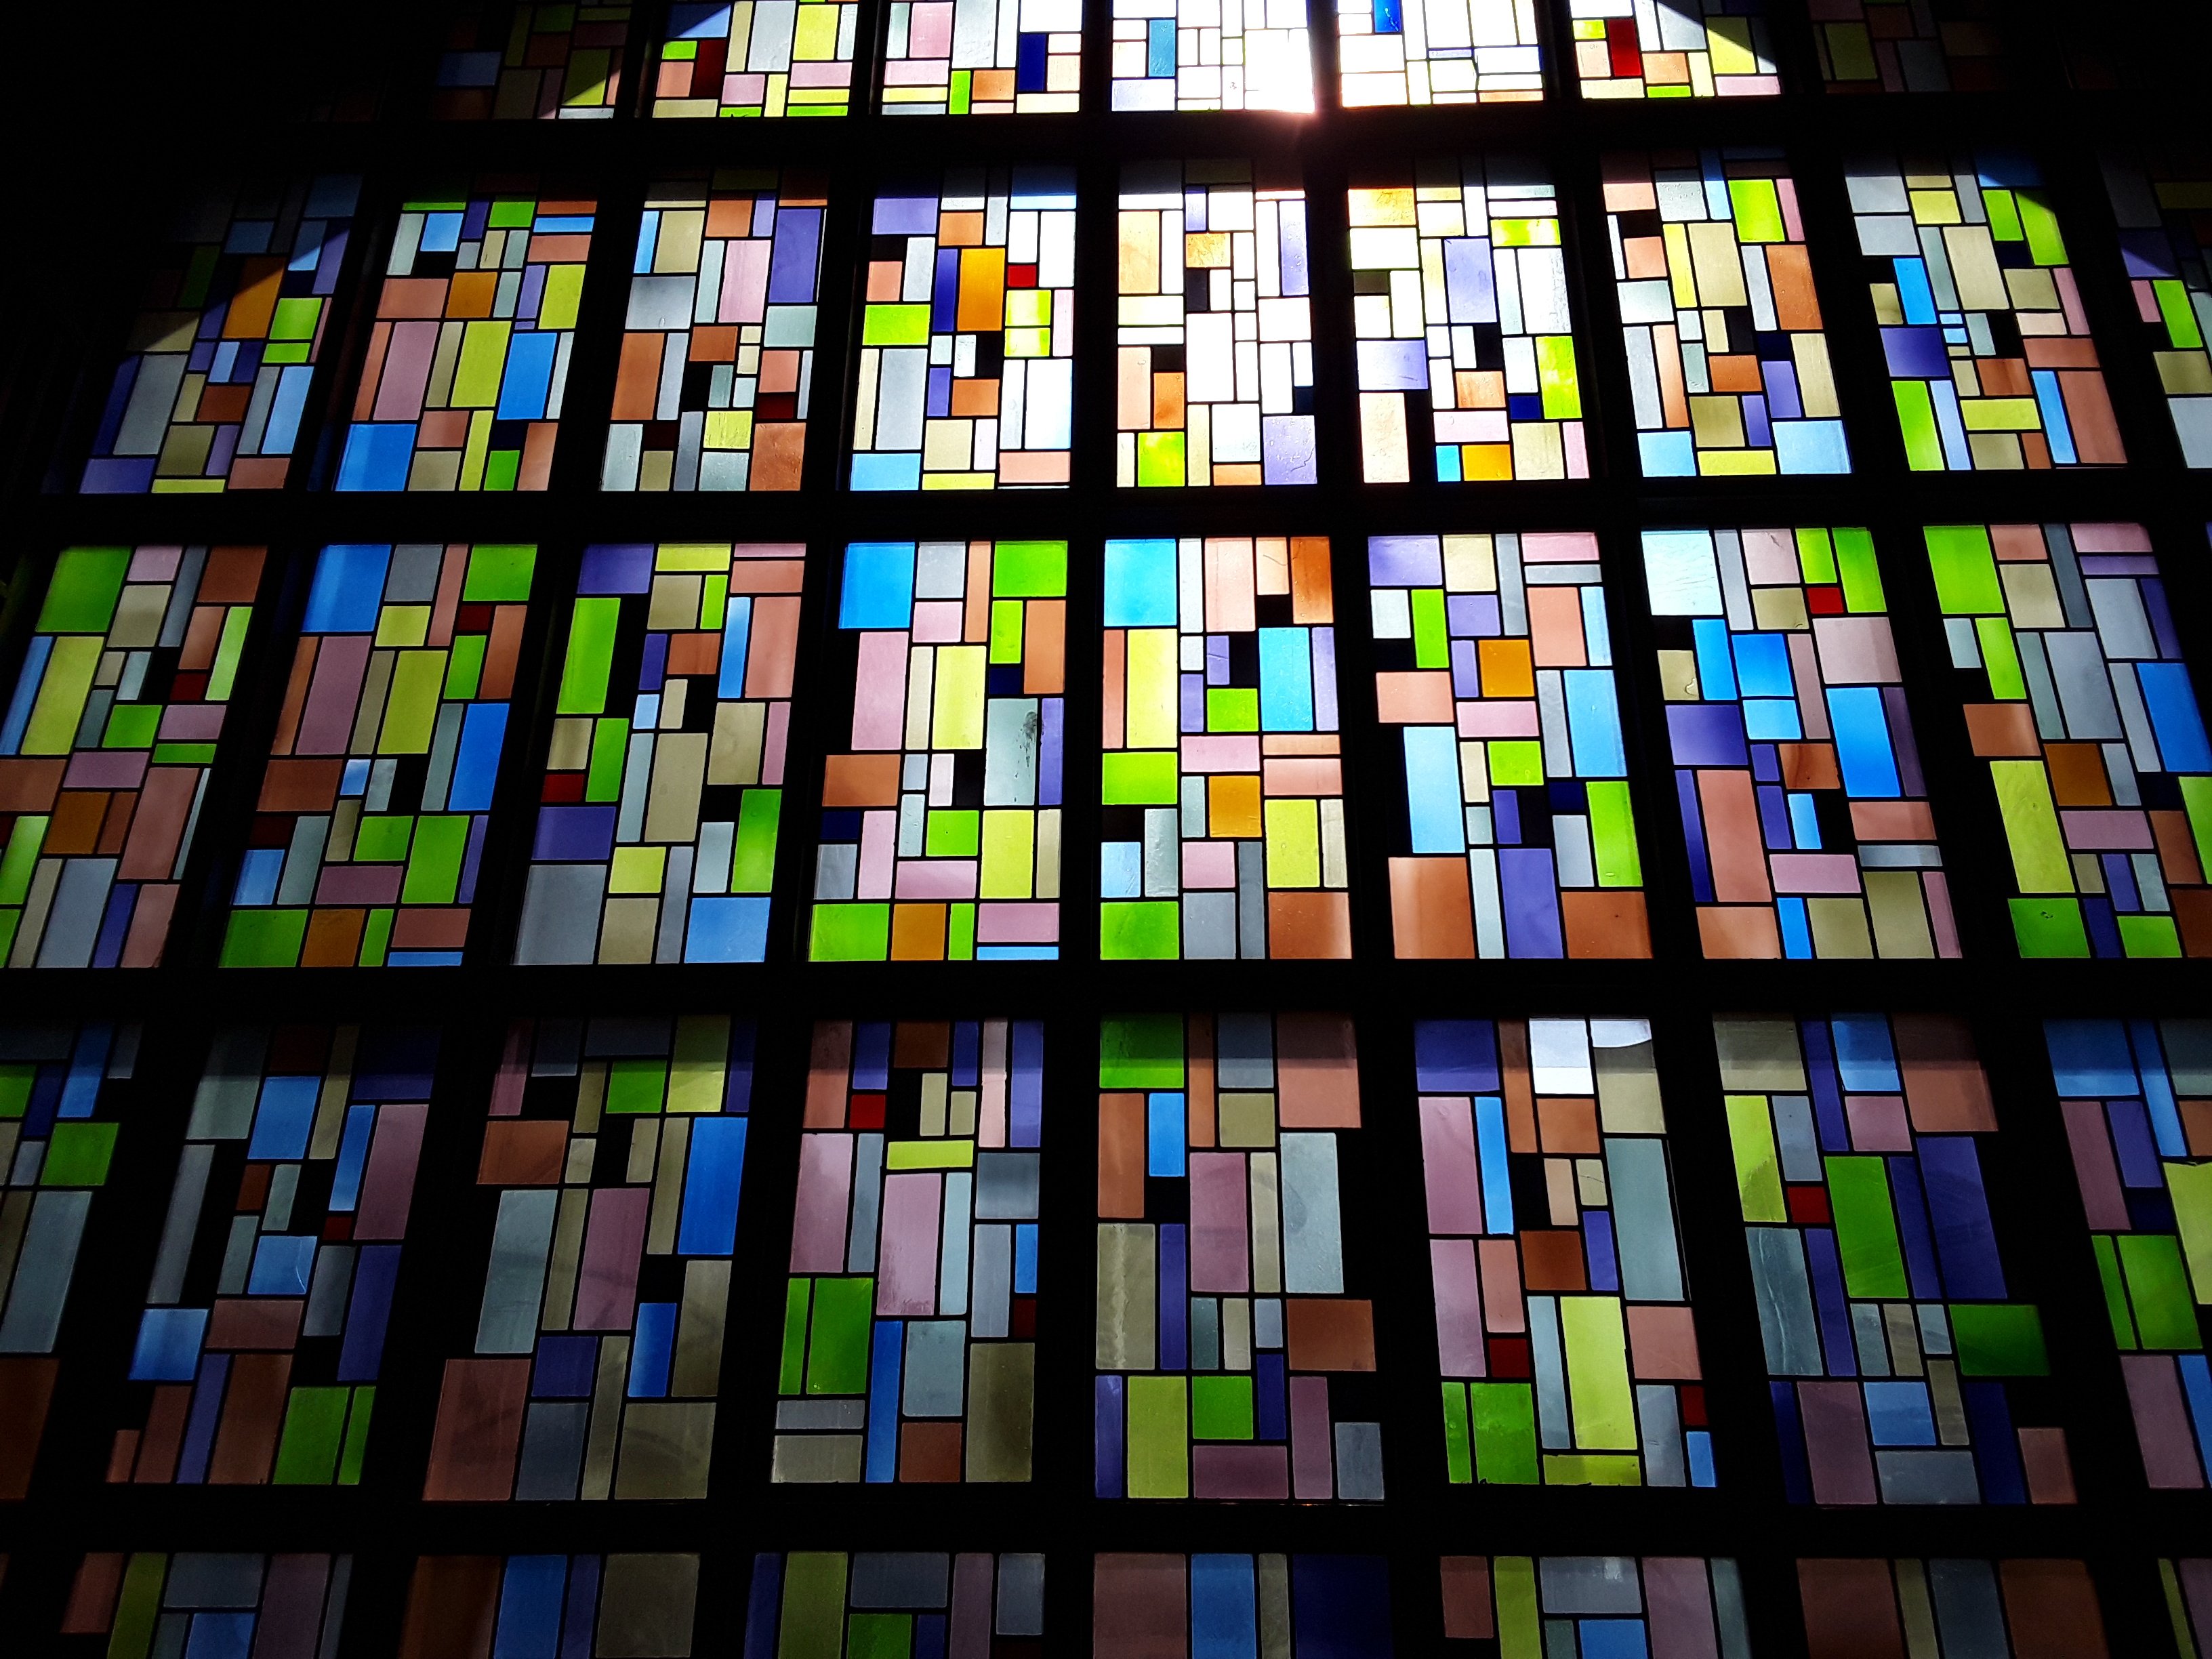 Picture of stained glass windows in front of church